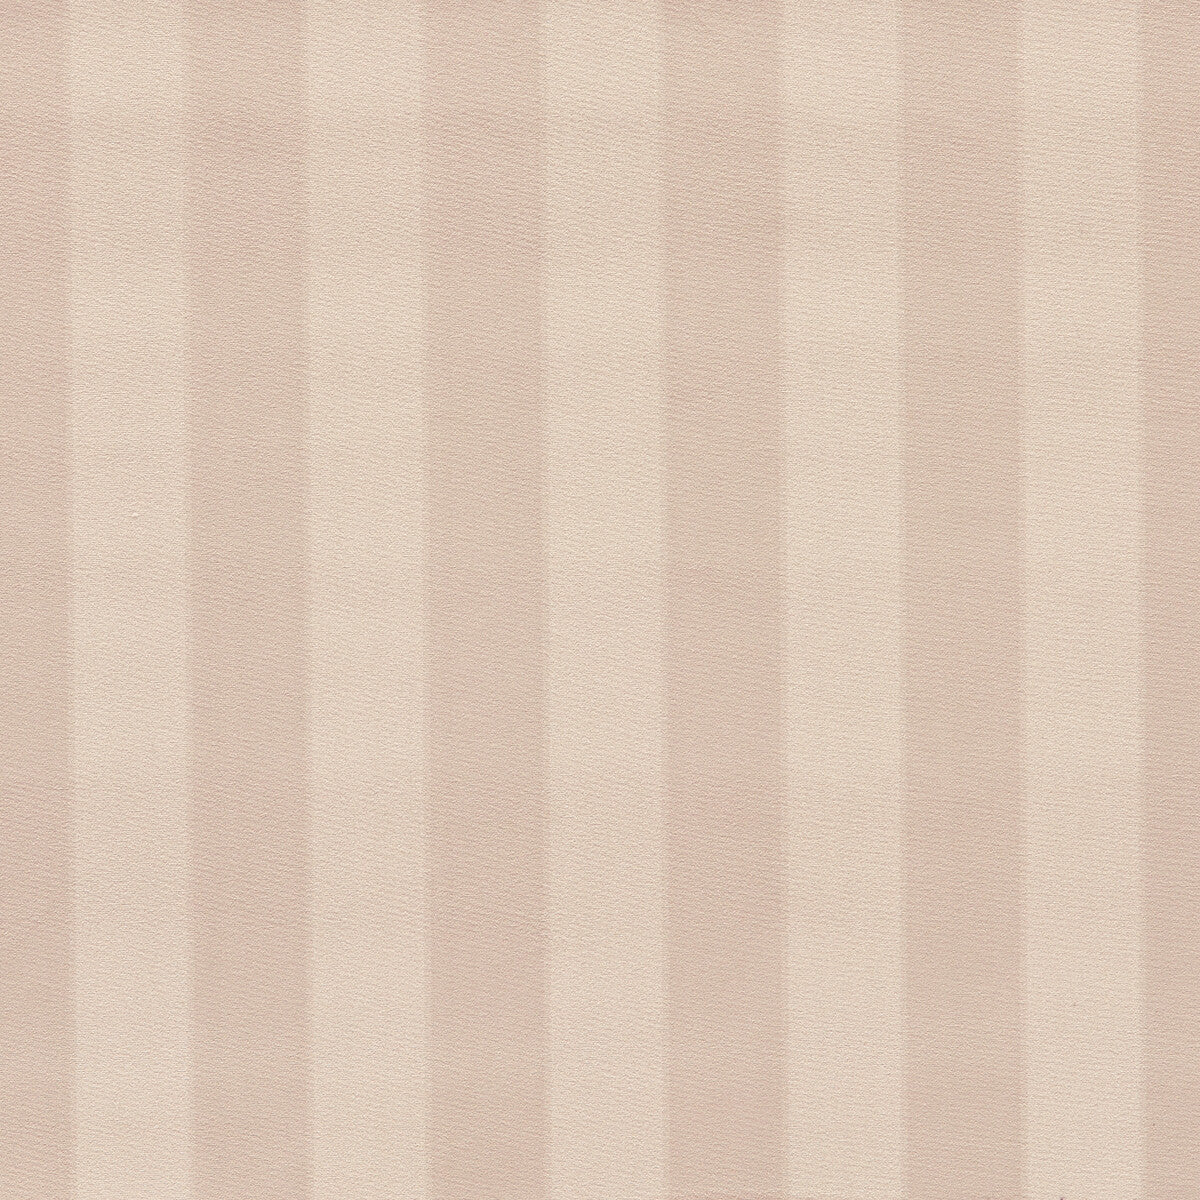 Haldon fabric in blush color - pattern F1690/02.CAC.0 - by Clarke And Clarke in the Whitworth collection